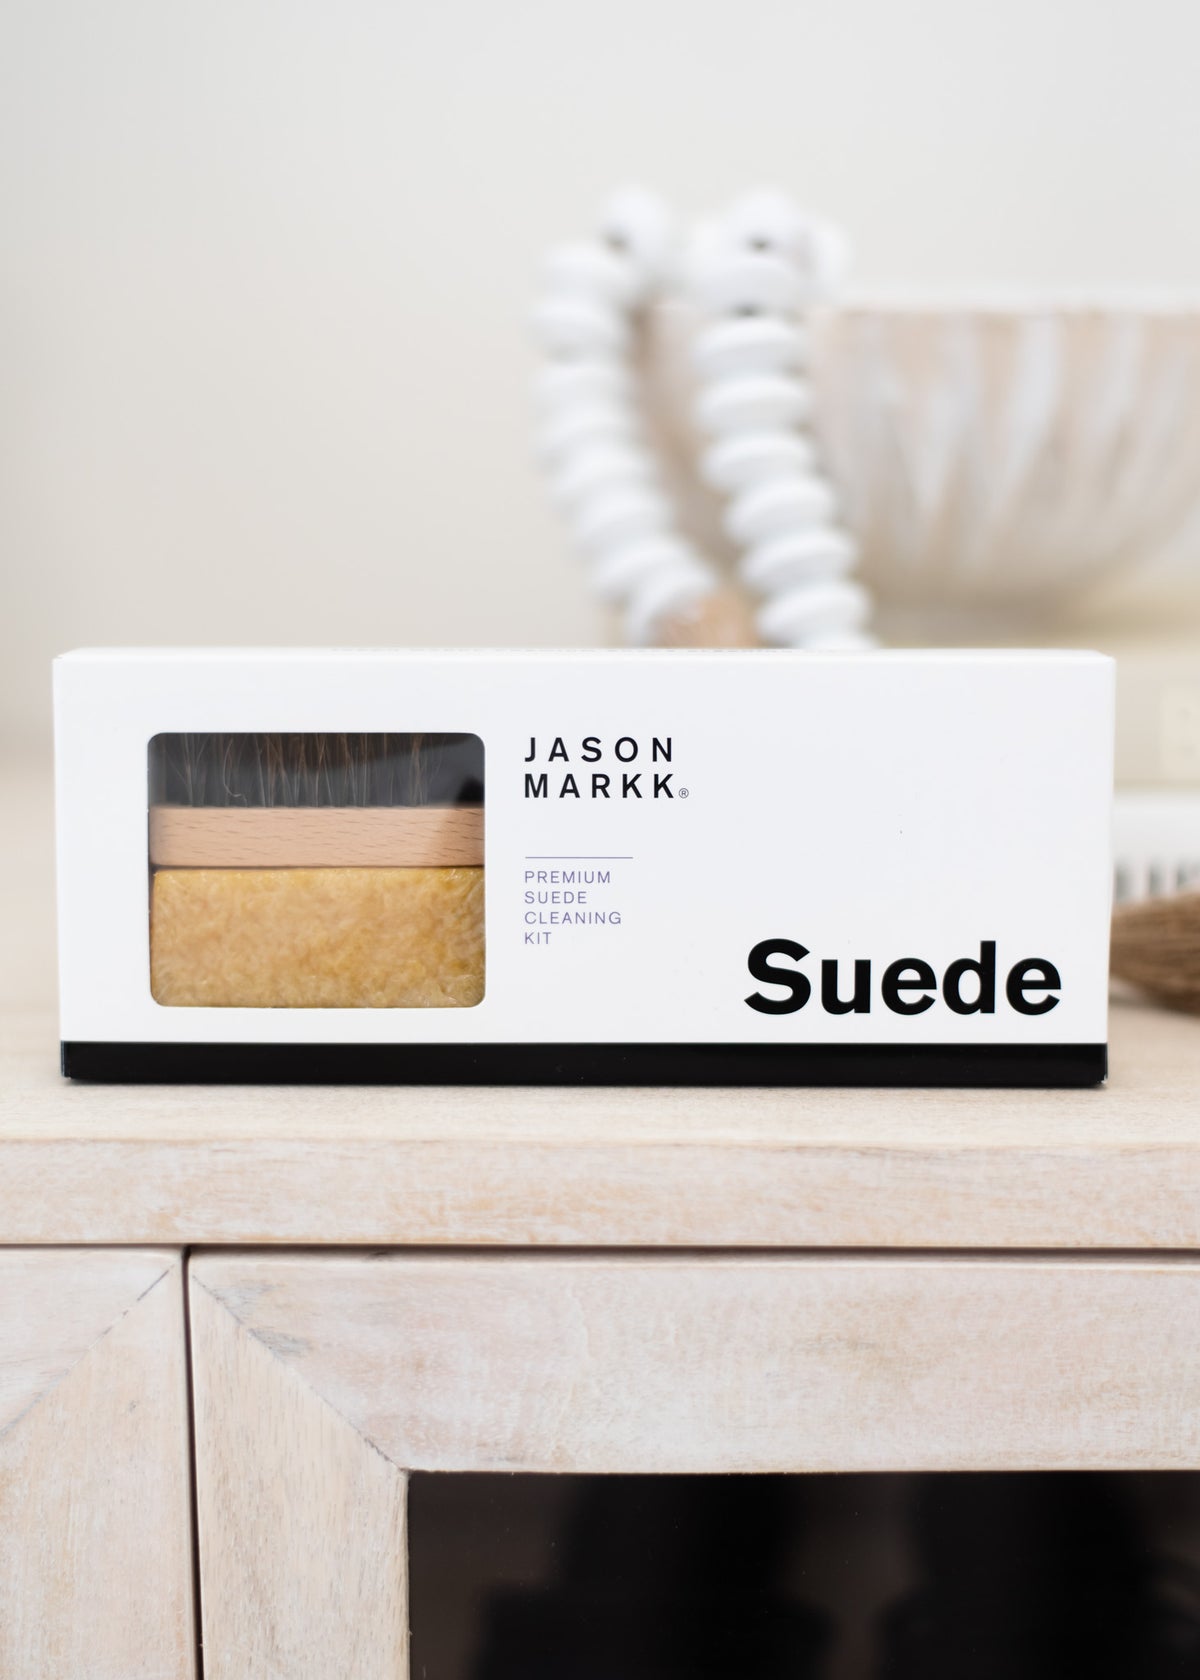 The Suede Kit